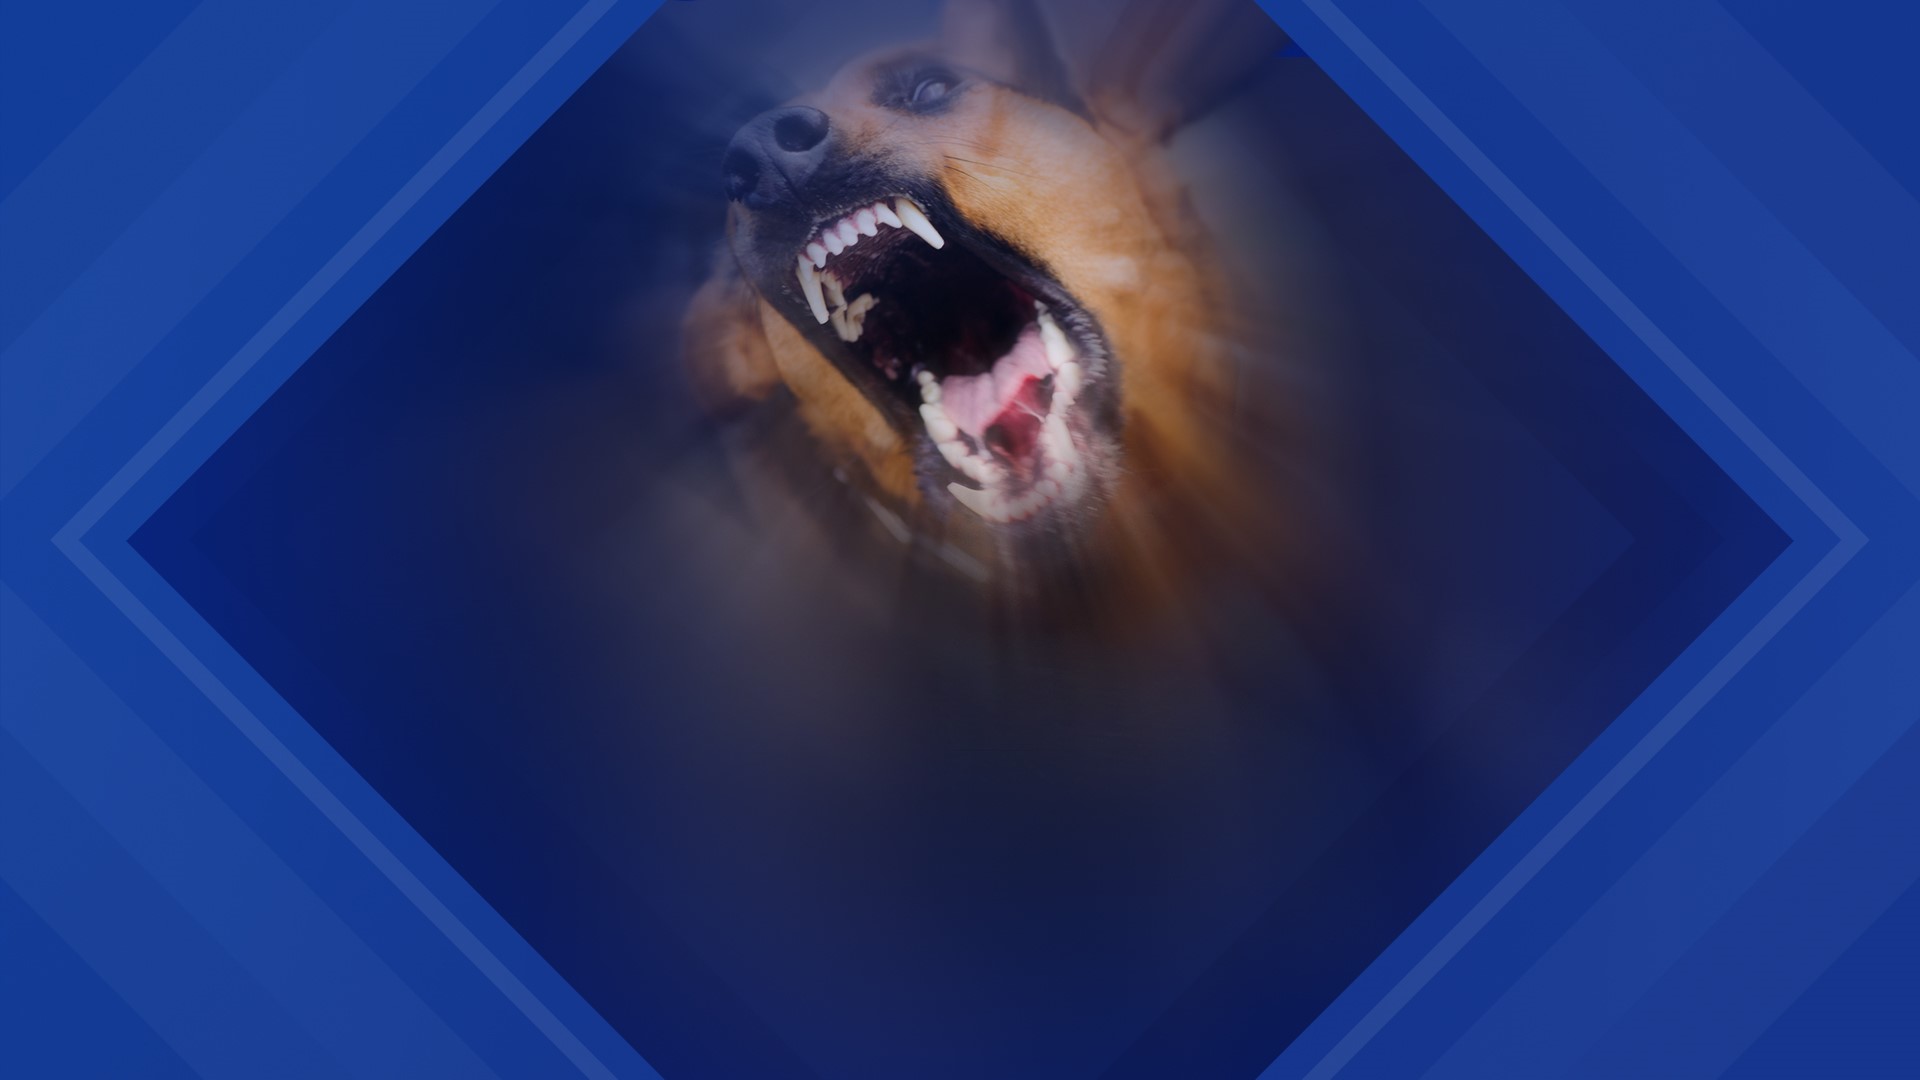 Two people were sent to the hospital with major injuries after a dog on Tuesday.